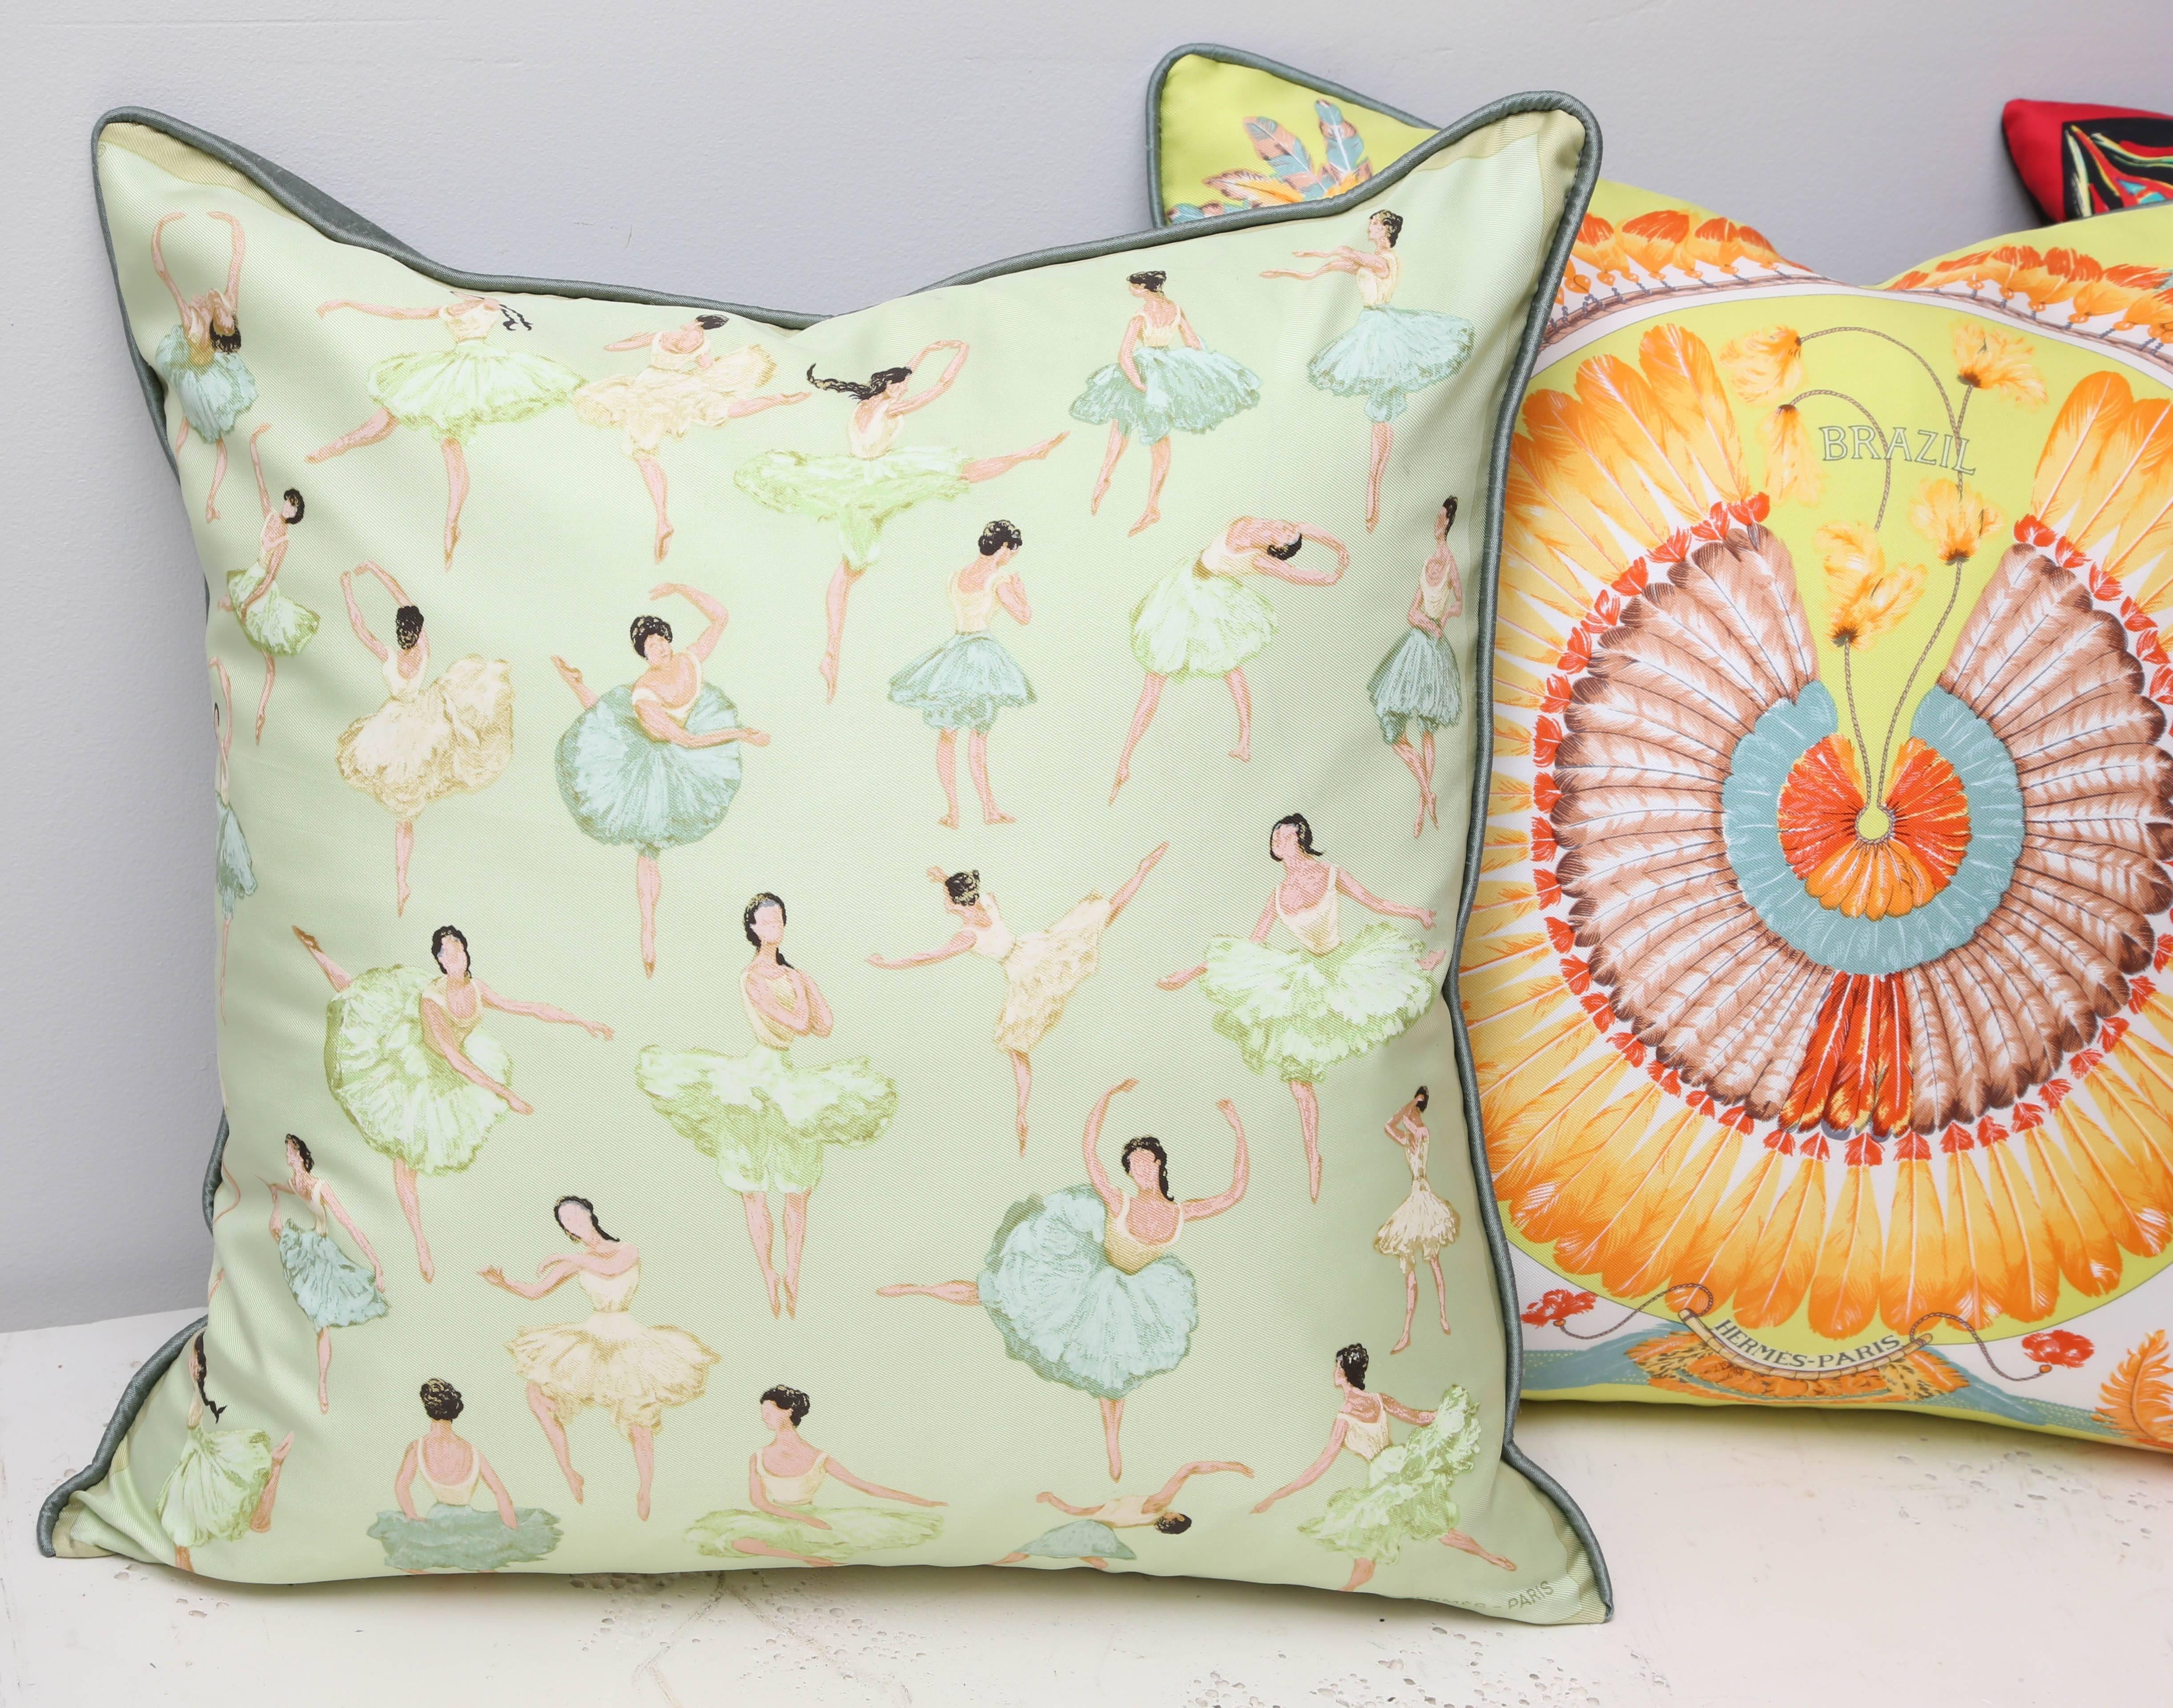 Three assorted vintage and colorful custom Hermes pillows.